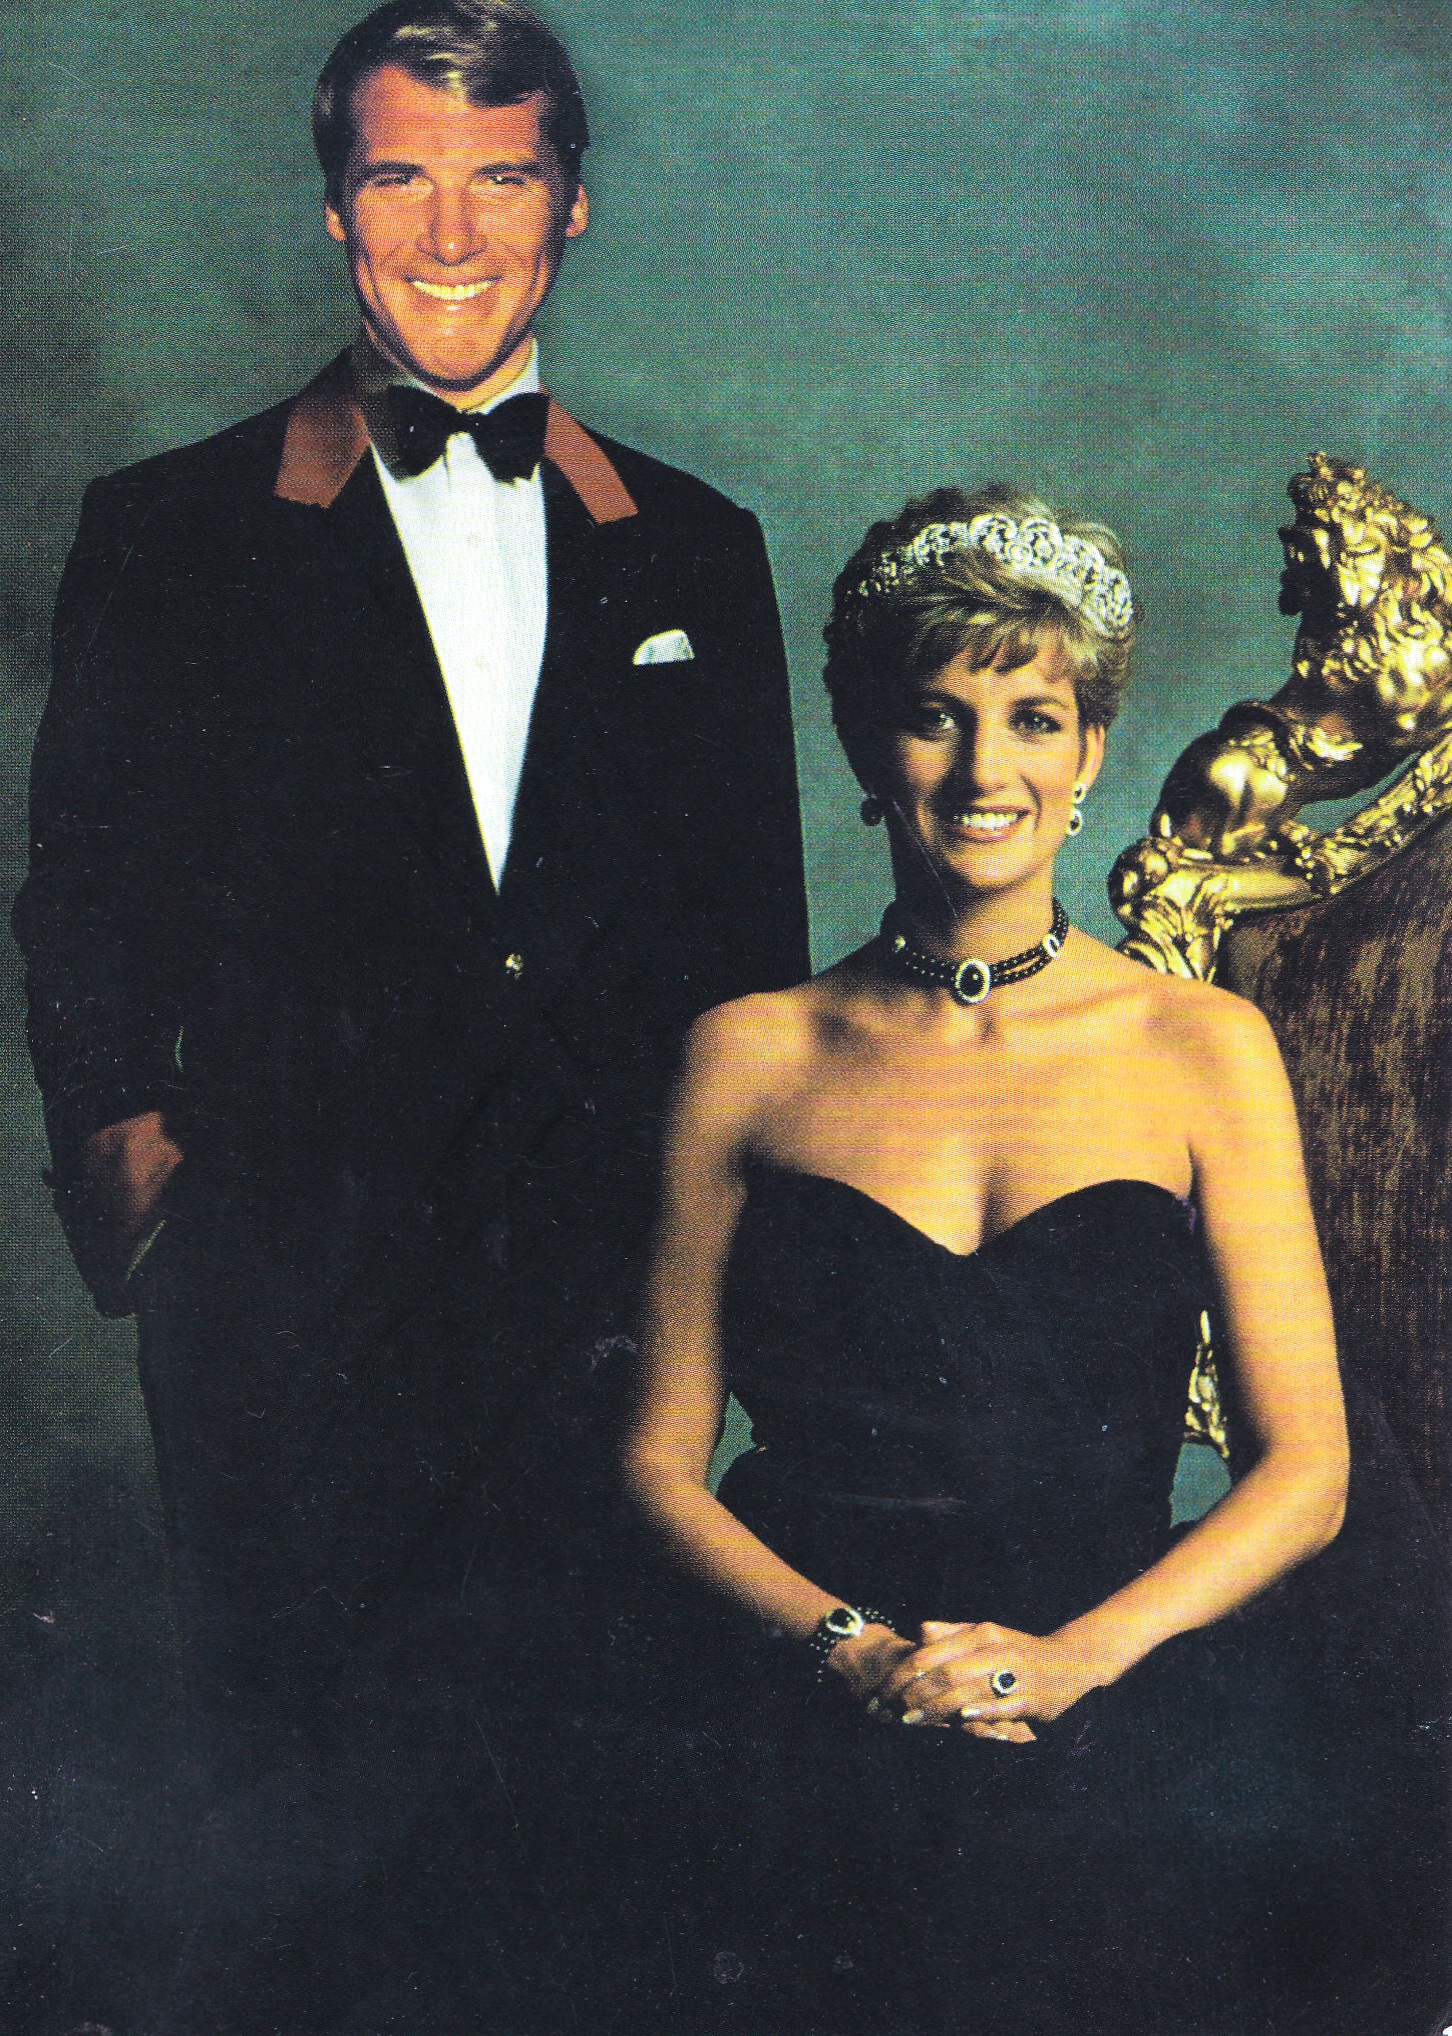 The night Princess Diana wowed Chicago and a certain local playboy